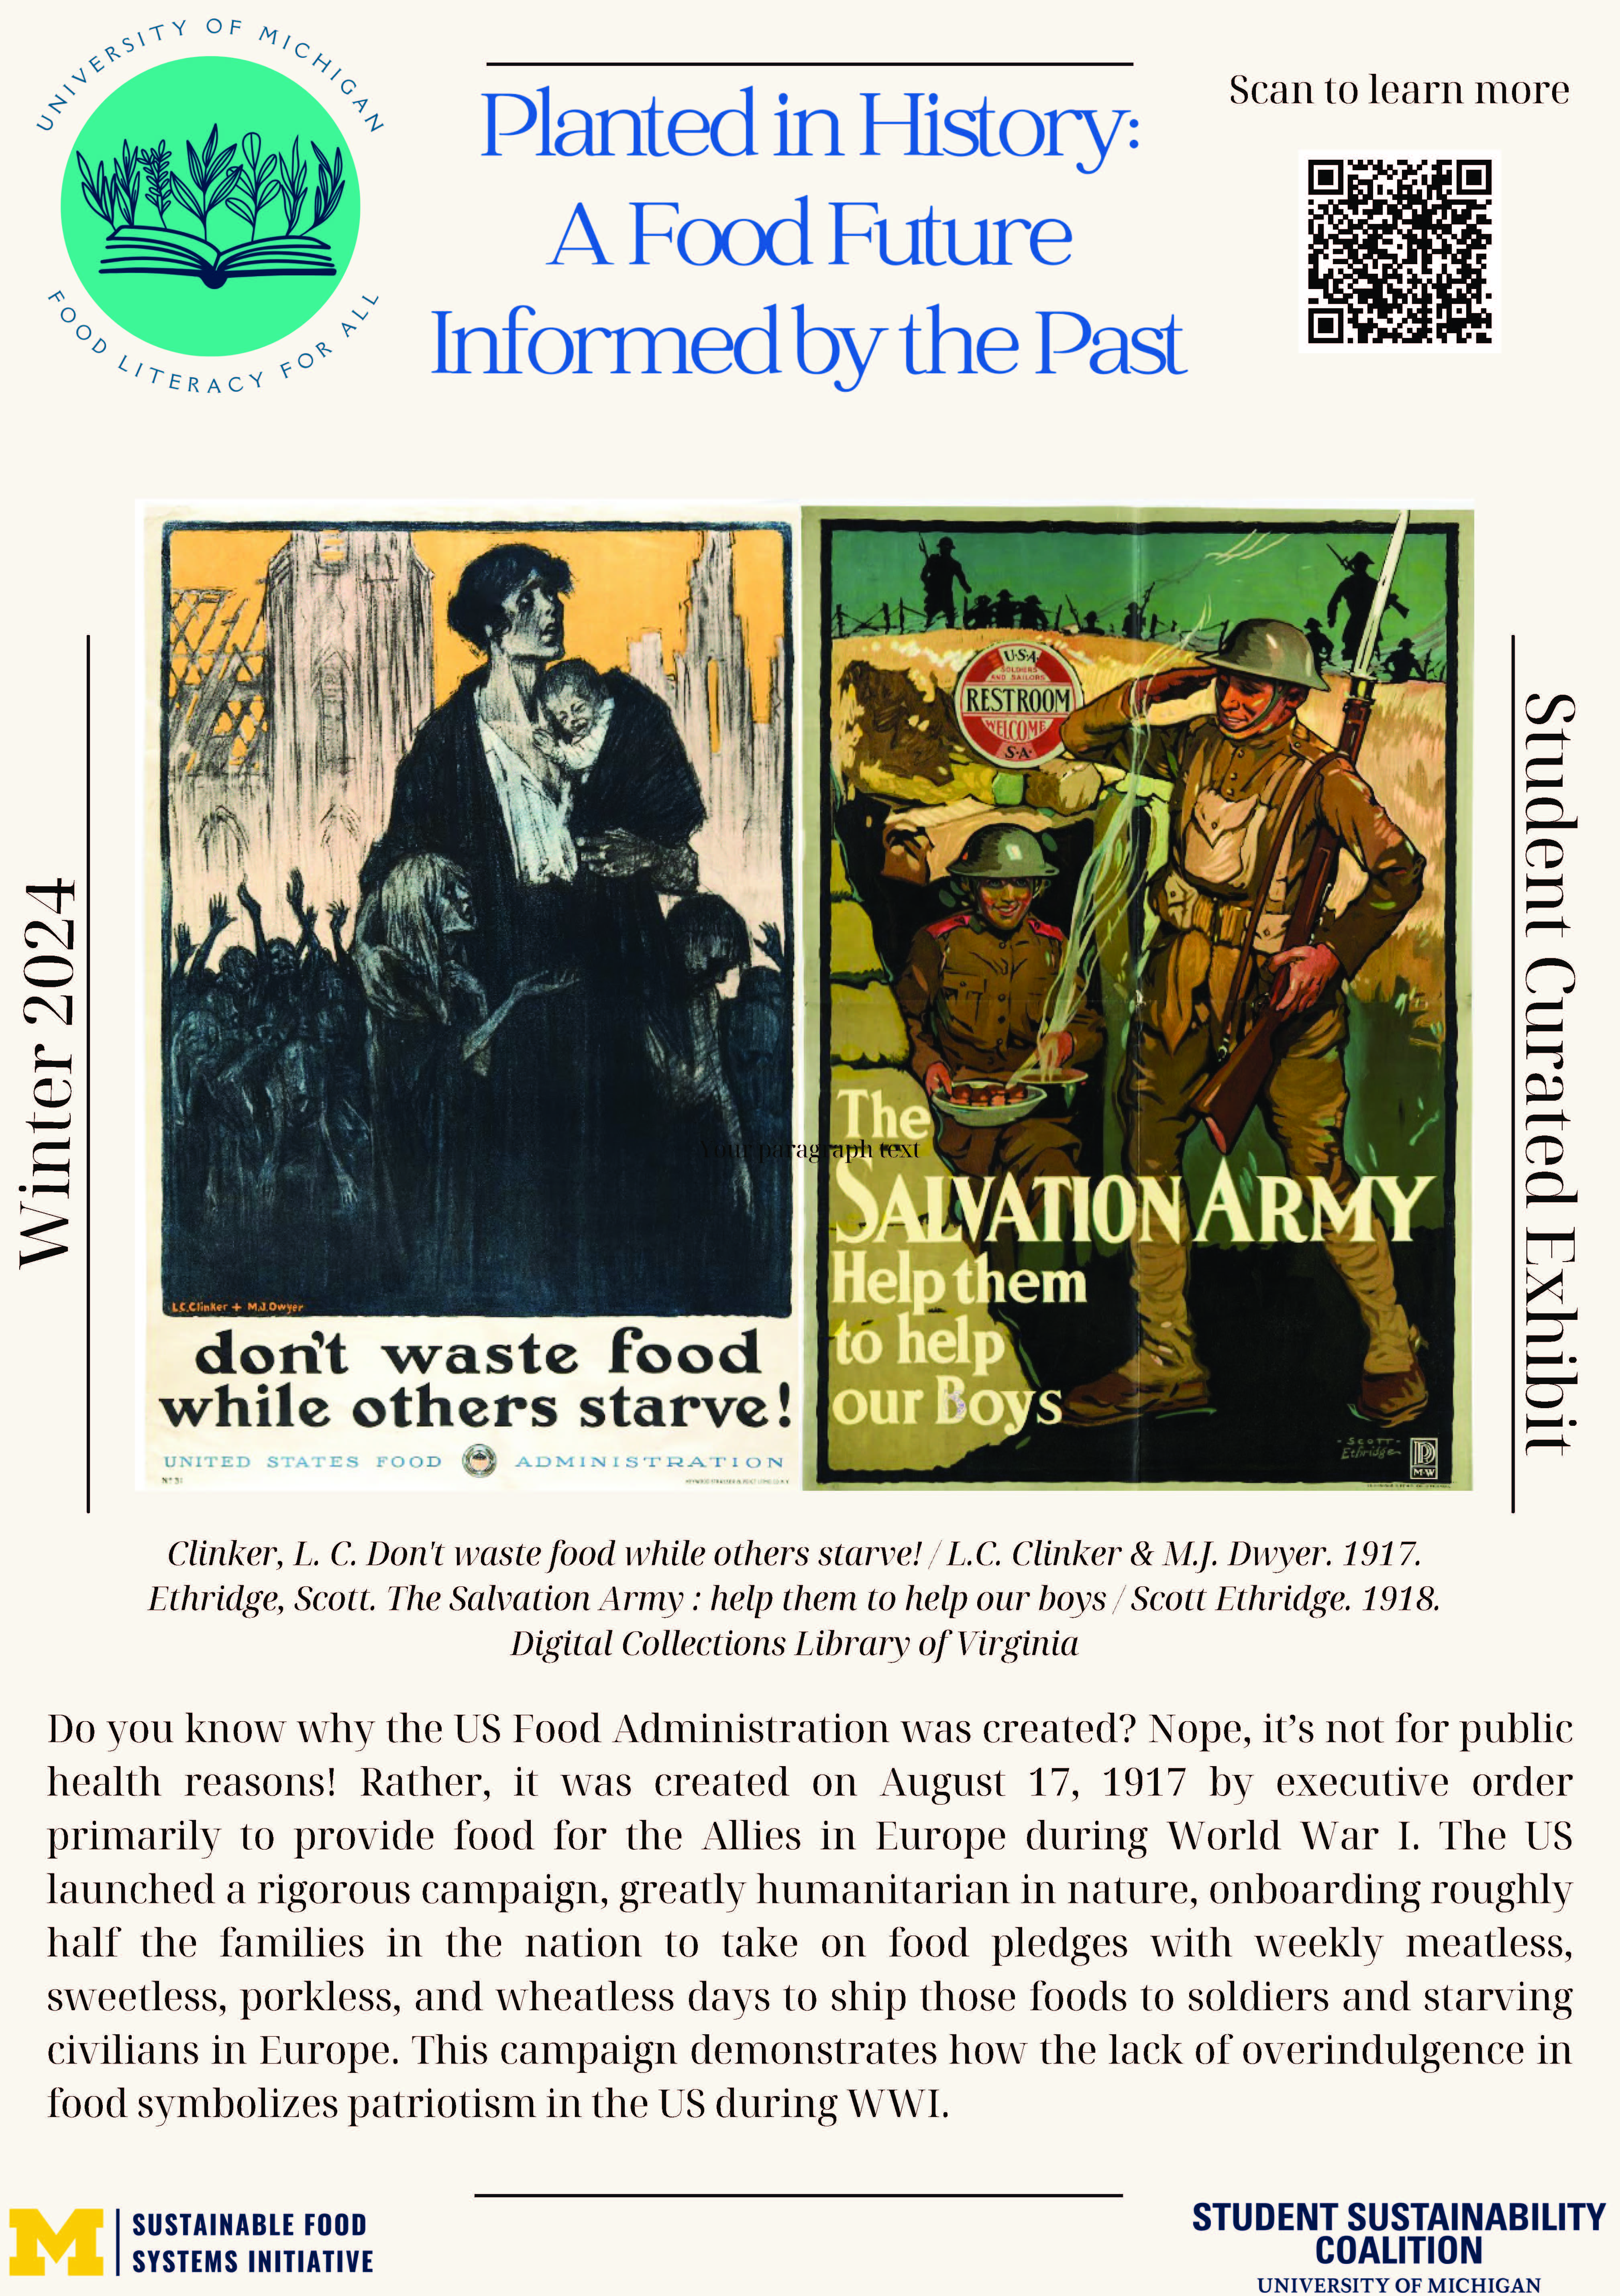 Poster showing the covers of two pamphlets: Don't Waste Food While Others Starve! (1917) showing an emaciated woman holding a crying infant, surrounded by skeletal children, and The Salvation Army: Help them to Help Our Boys (1918) showing two cheerful American soldiers,  from the Digital Collections of the Library of Virginia. The main text is included in the image caption. 